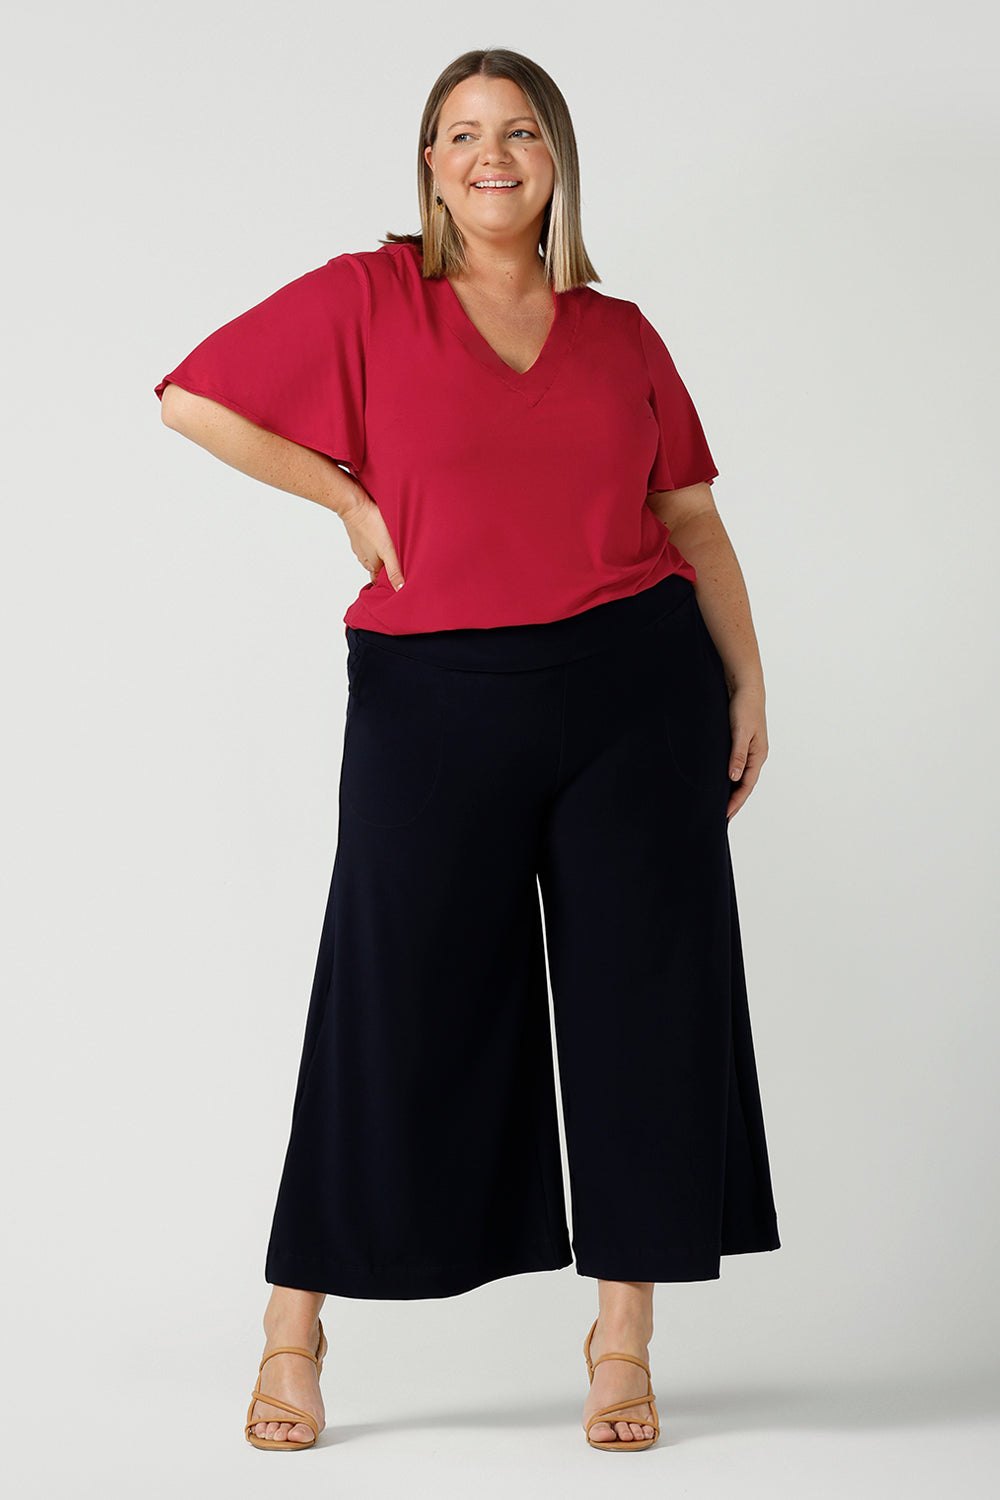 Happy curvy woman wears the Lila Top in Flame bamboo in a Christmas red colour. The bamboo material is breathable, soft and temperature regulating. The Lila top features a flutter sleeve and deep v-neckline. Made in Australia for women size 8-24.